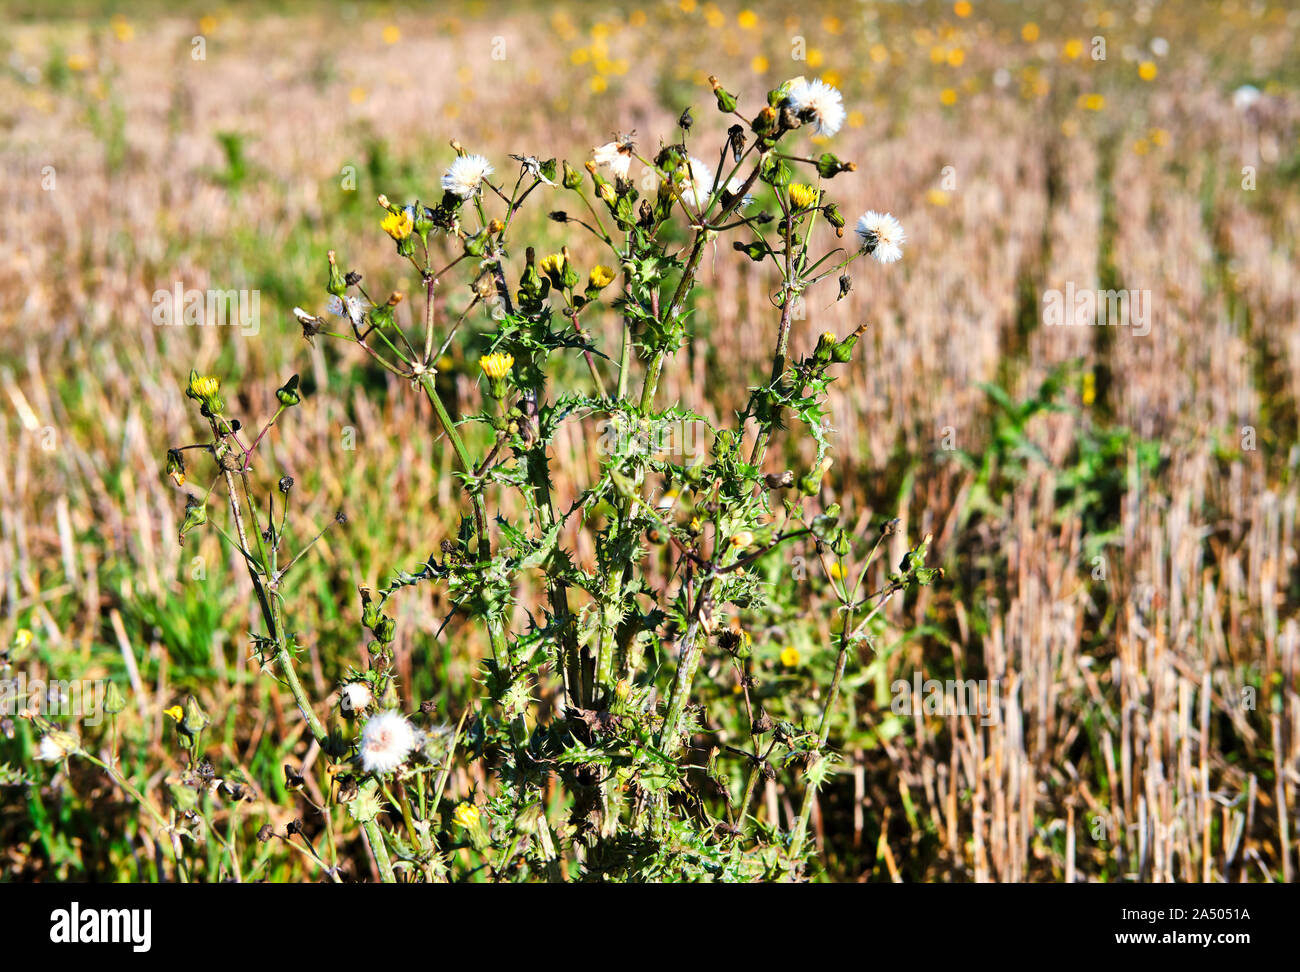 close up image of groundsel Senecio vulgaris showing both flowers and seed heads in a stubble field against an out of focus background Stock Photo